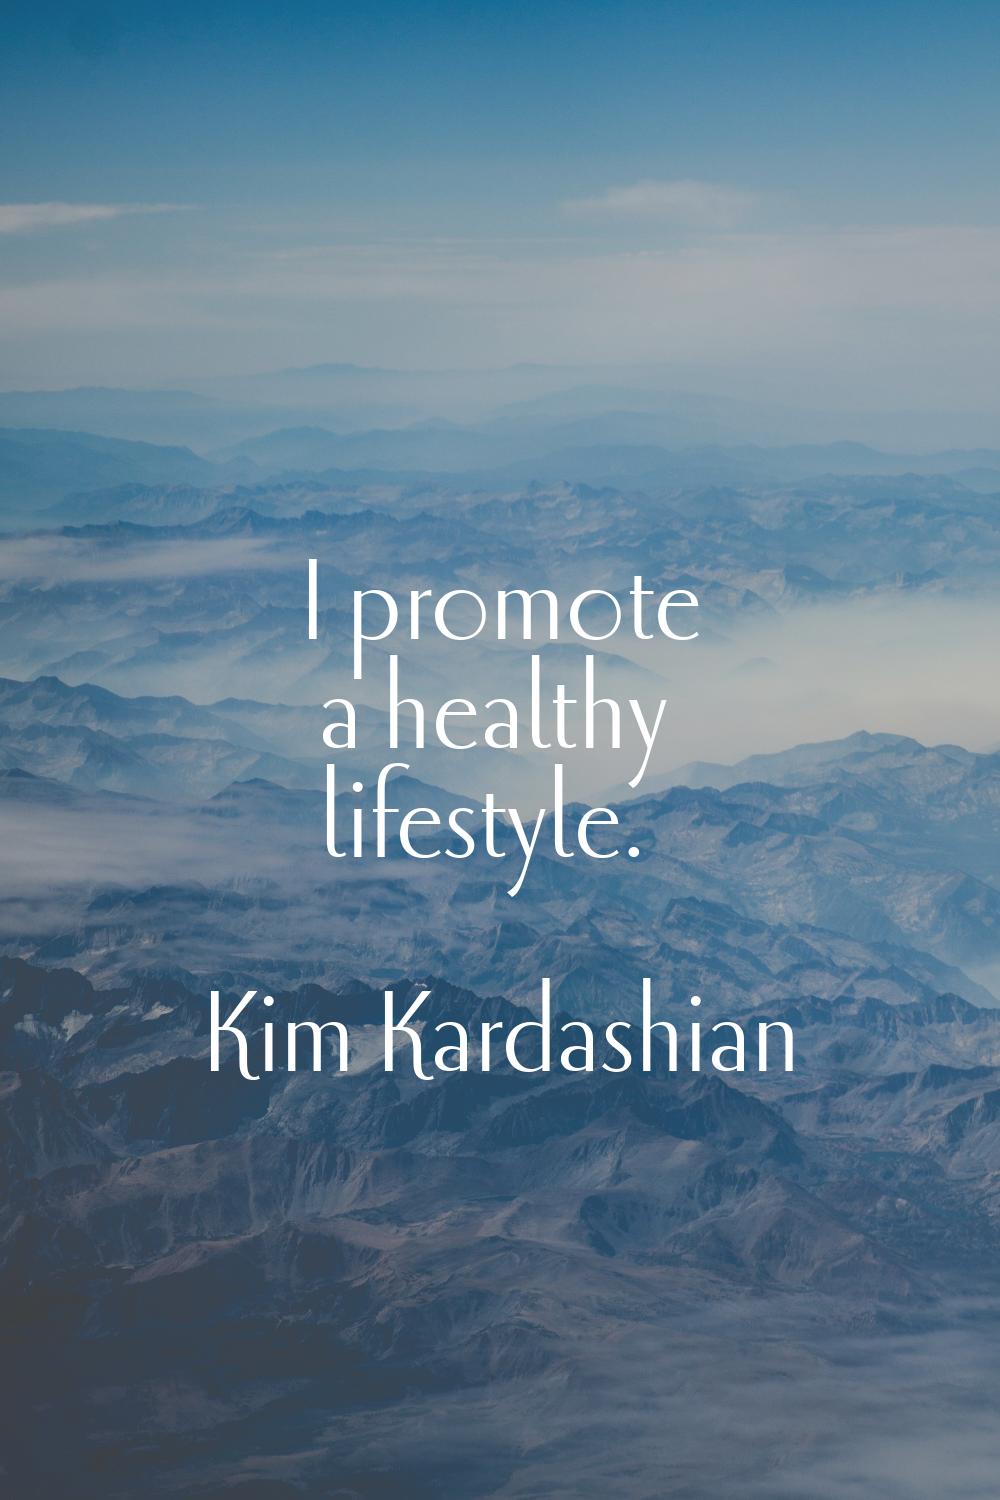 I promote a healthy lifestyle.